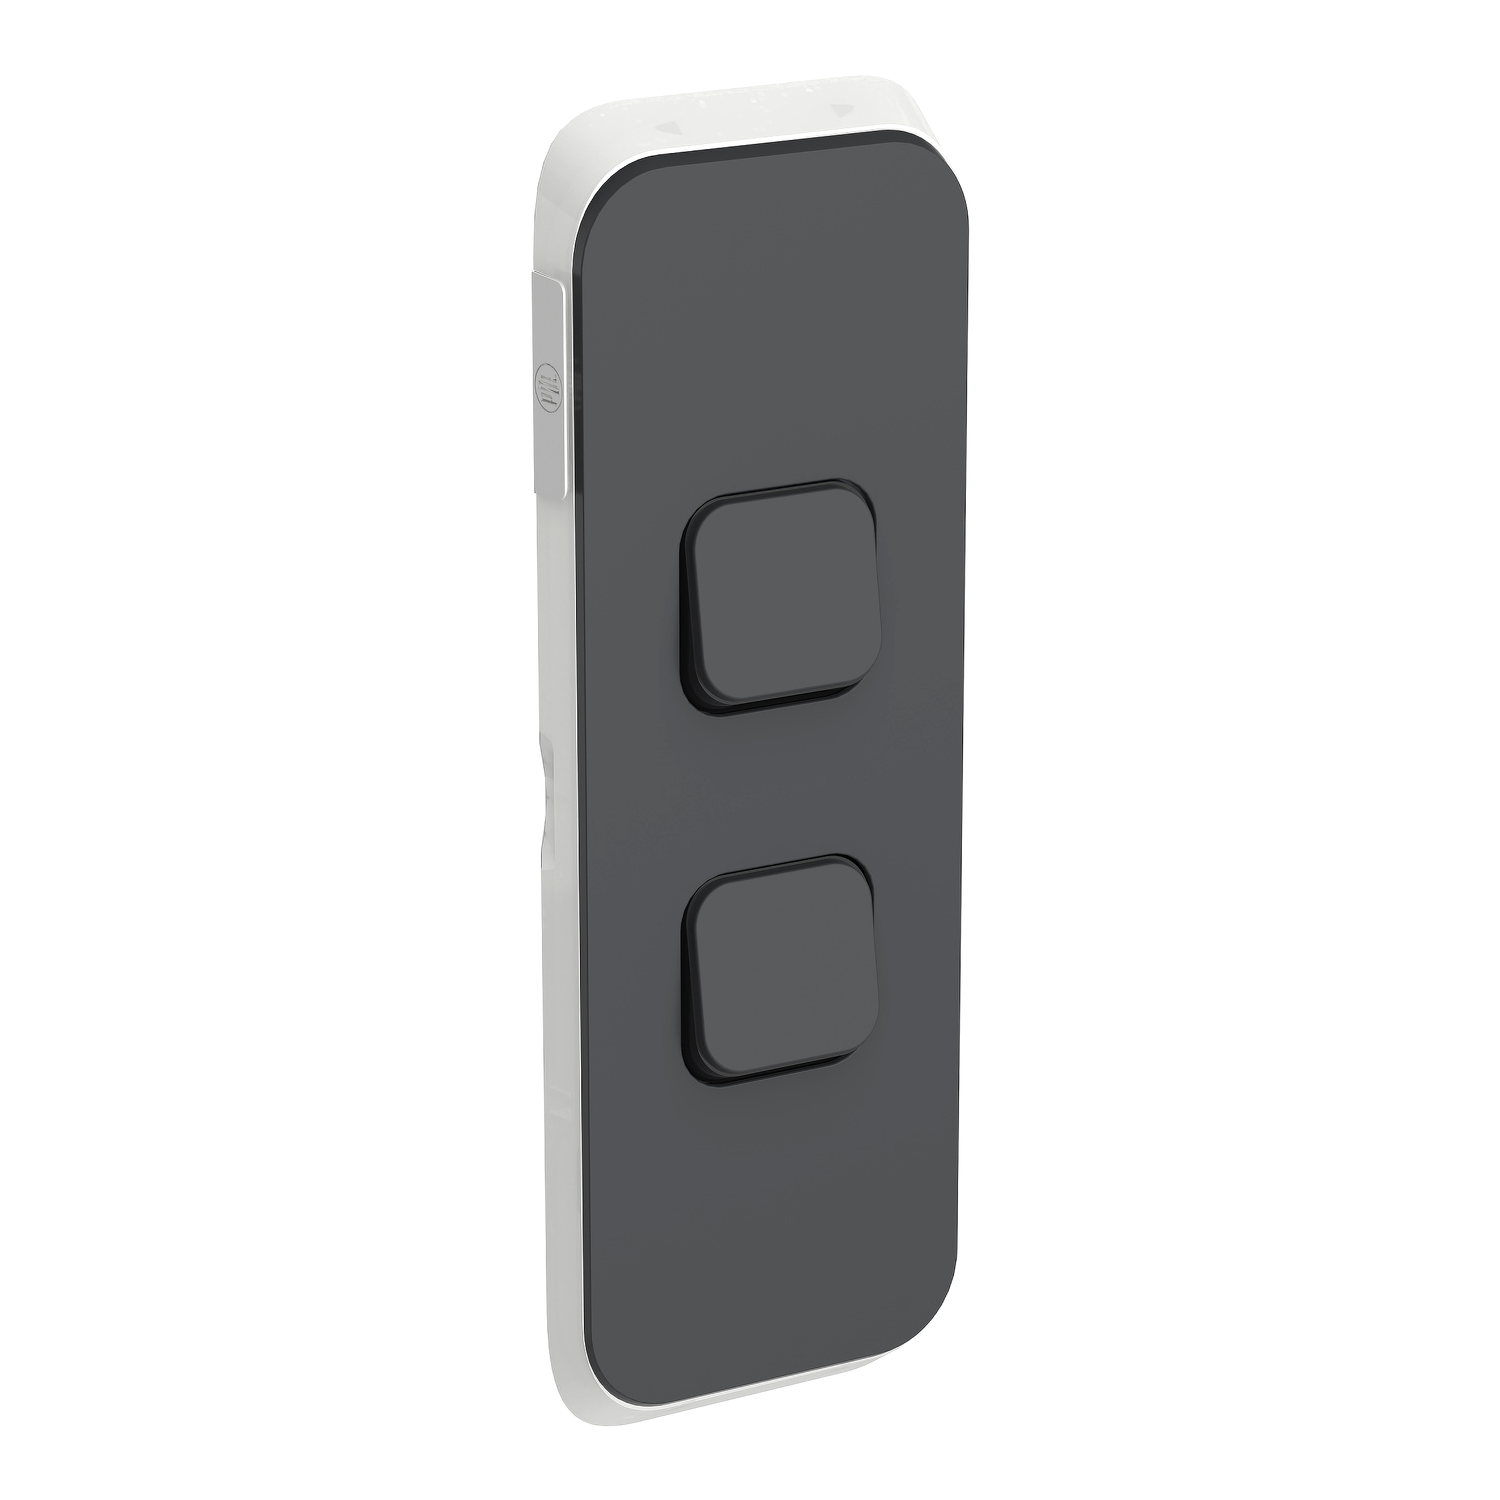 PDL Iconic - Cover Plate Switch Architrave 2-Gang - Anthracite